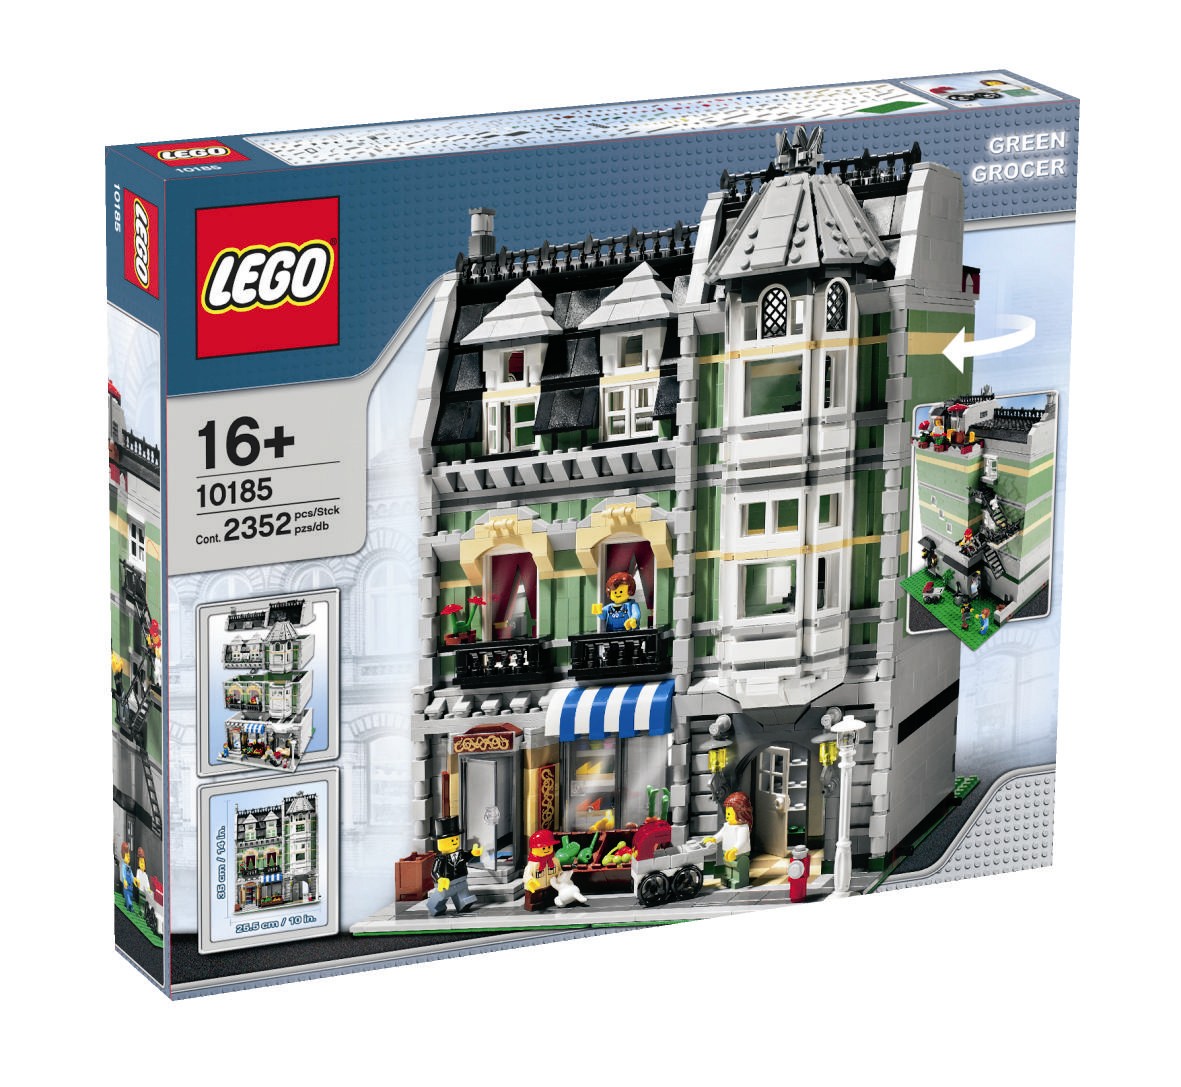 Brick Loot LED Lighting Kit for Your Lego Green Grocer Set 10185 Note: The Model is NOT Included 